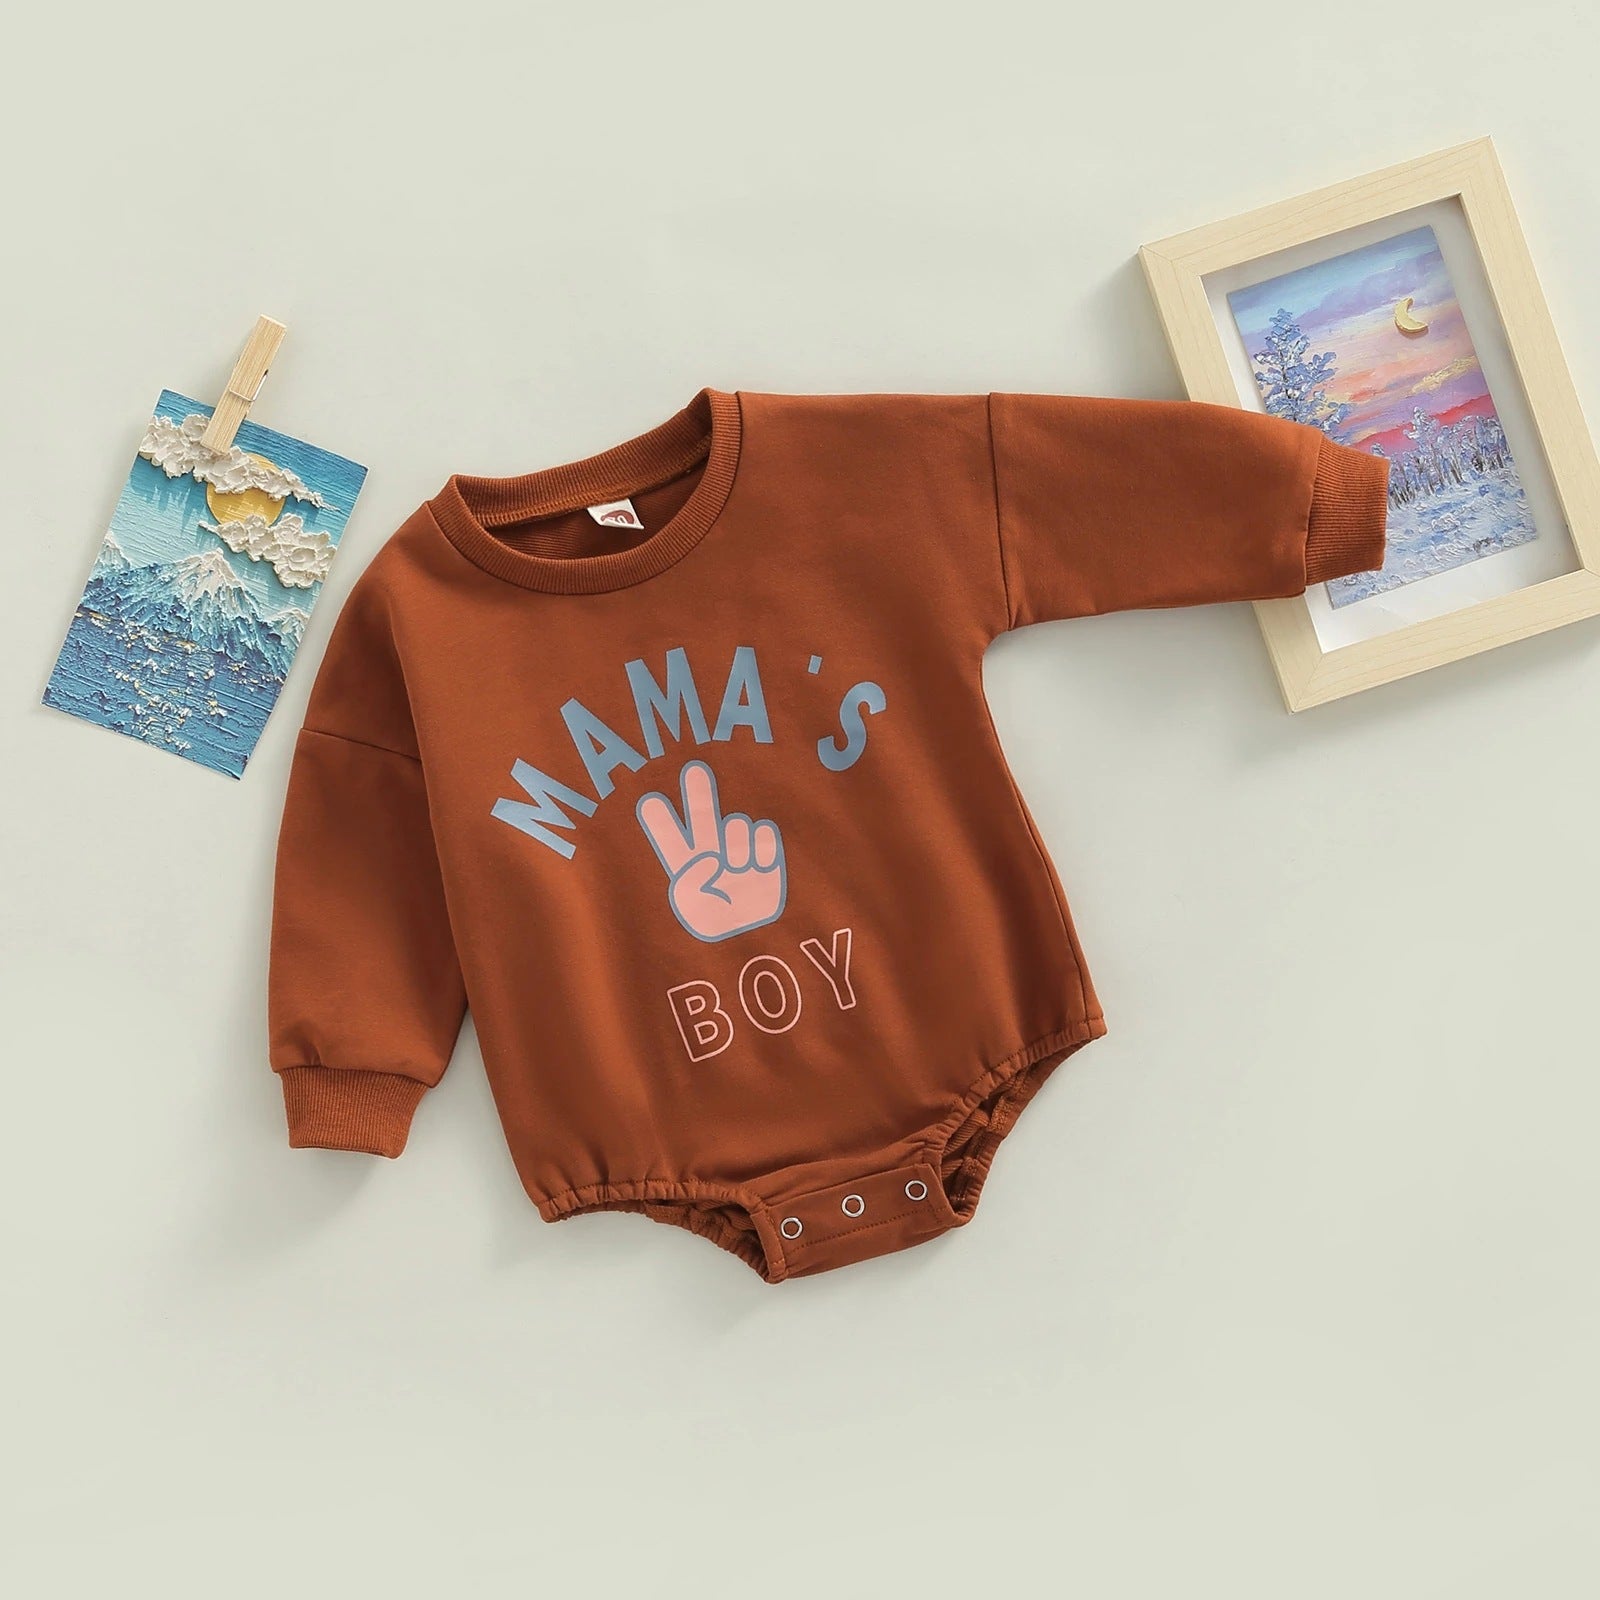 Add Style and Comfort to Your Child's Wardrobe with Our Brown Lettering Printed Romper